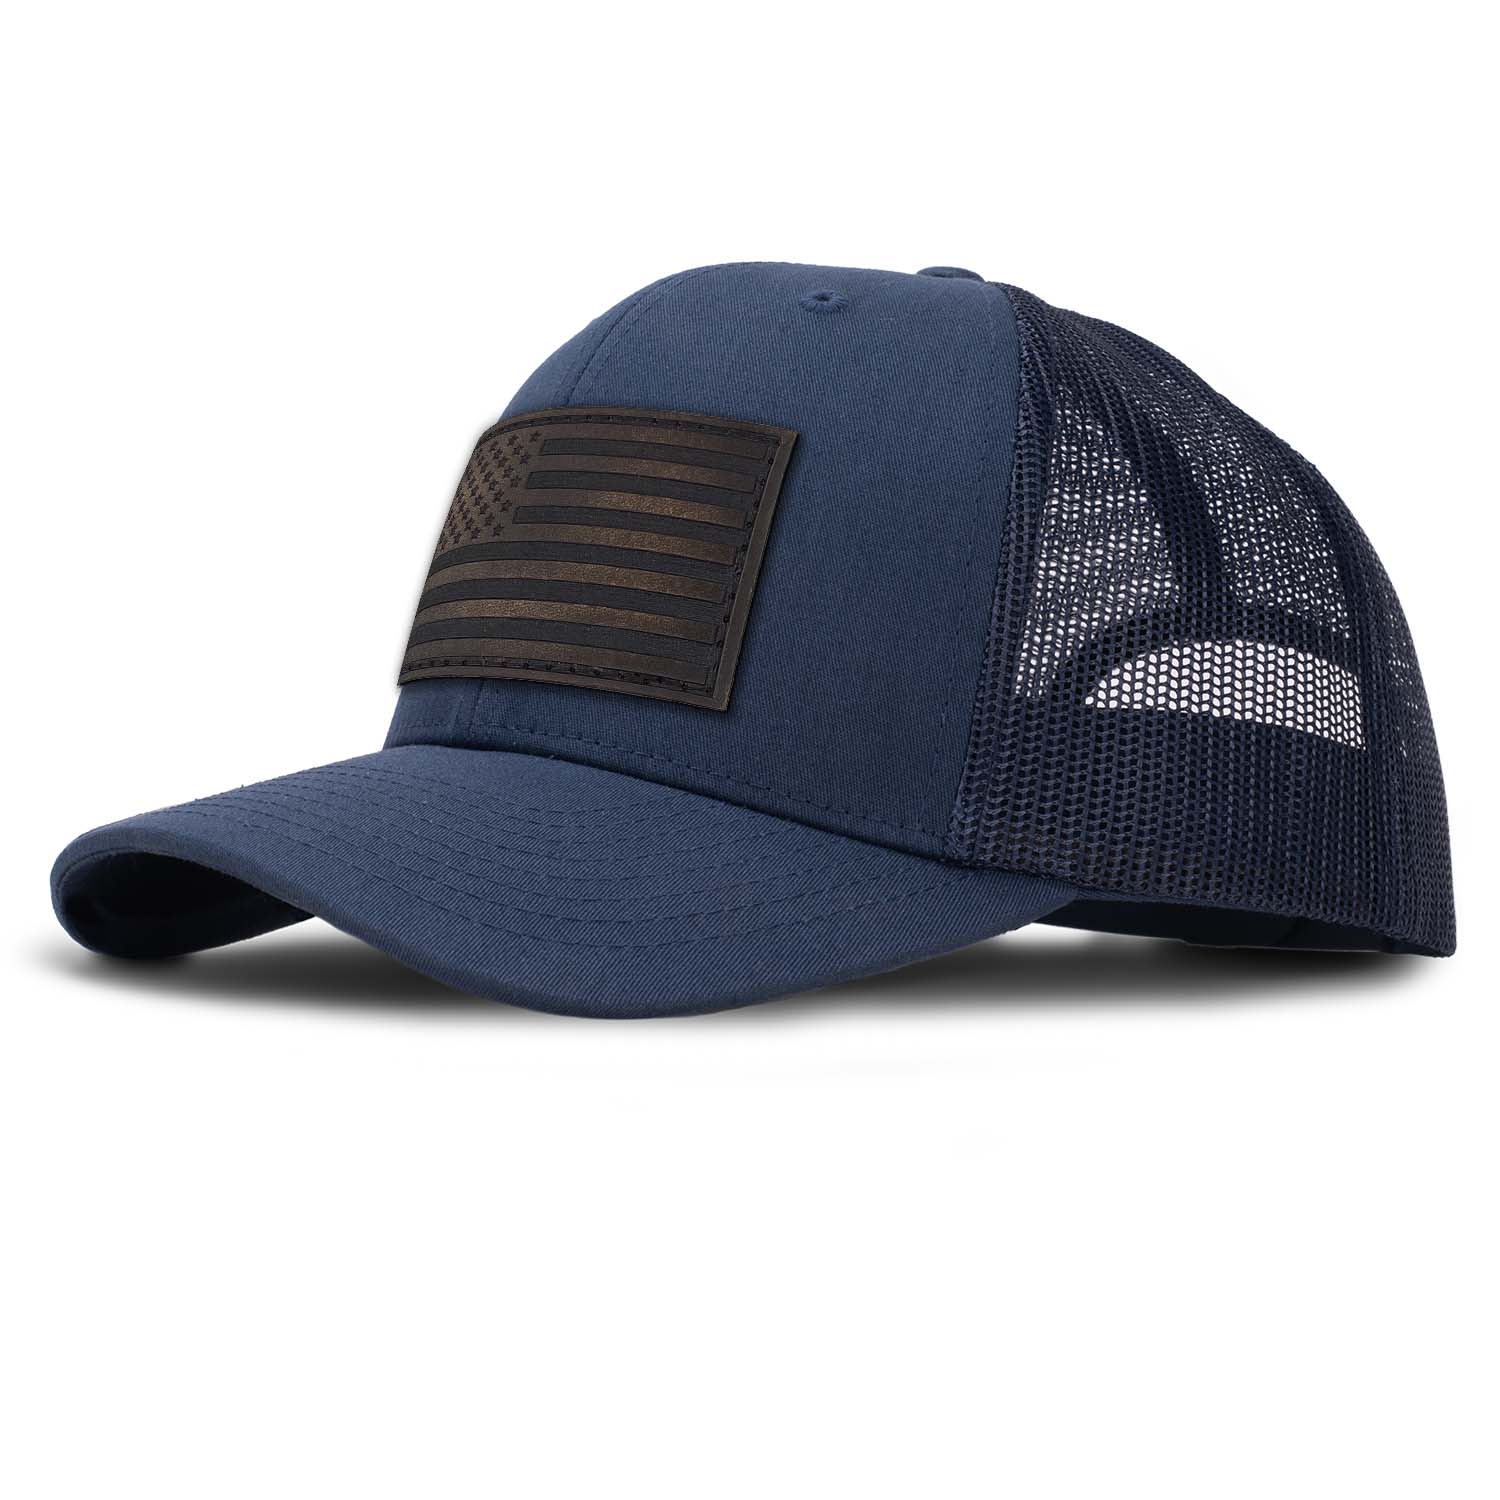 Revolution Mfg classic trucker hat in navy with navy mesh with a dark brown full grain leather American flag patch